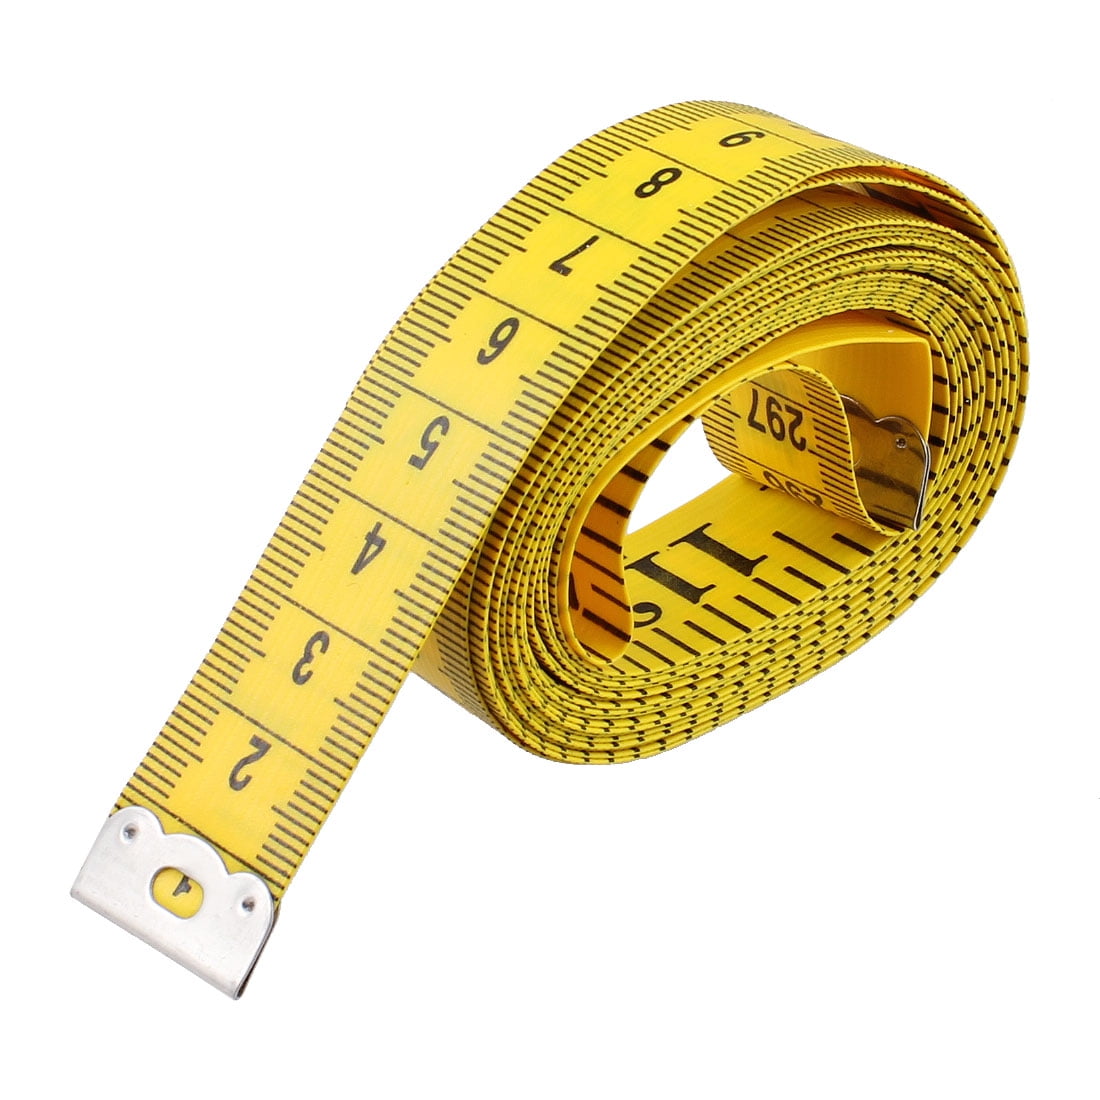 150cm/60" Soft Flat Cloth Measuring Tape Sewing Tailor Seamstress Ruler Measure! 